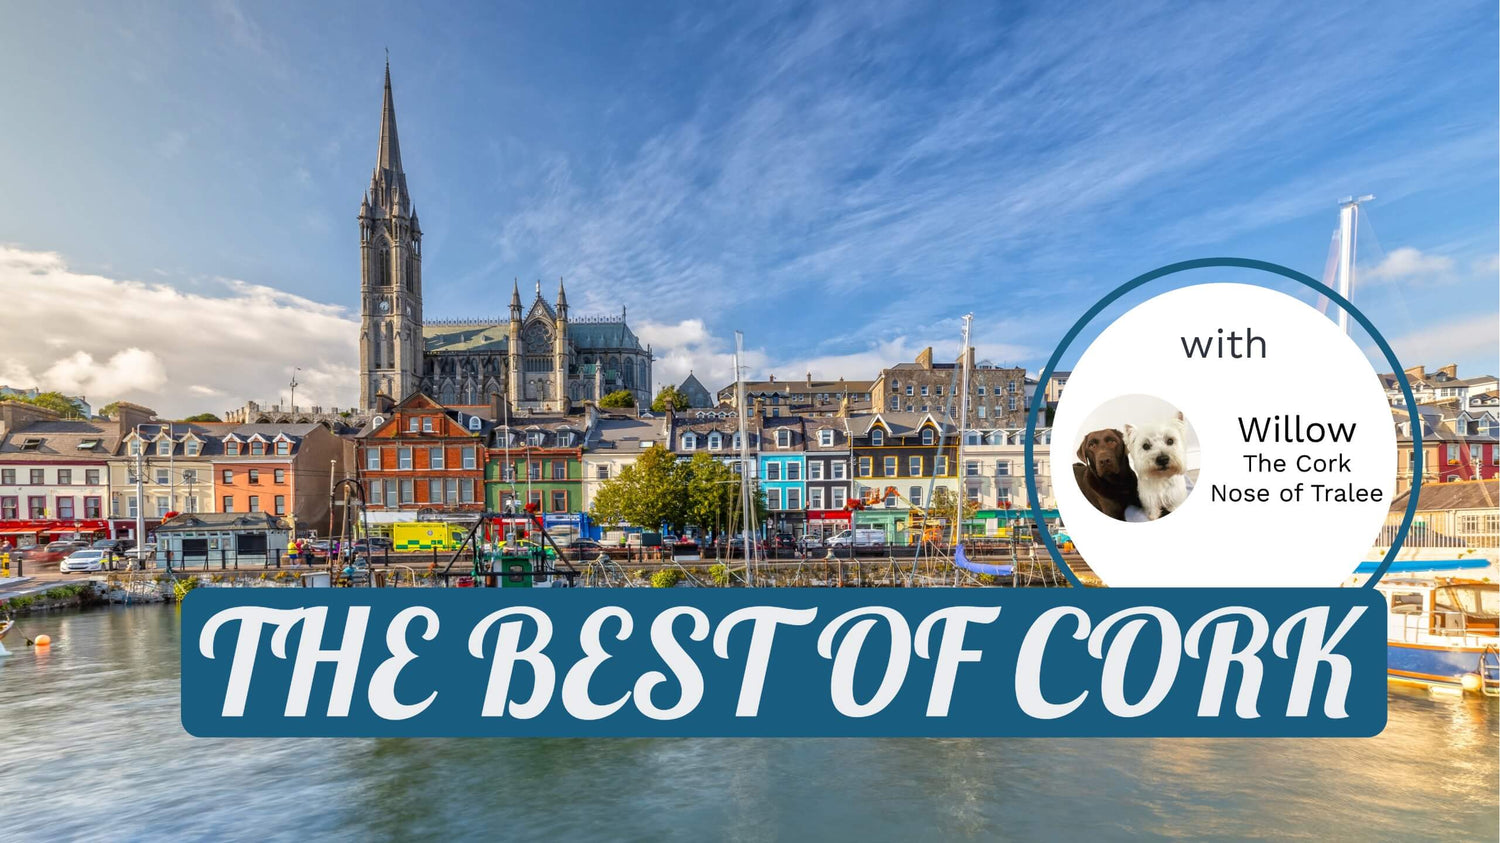 An image of Cobh from the water with the colourful house and the cathedral and a box with text “The Best of Cork”